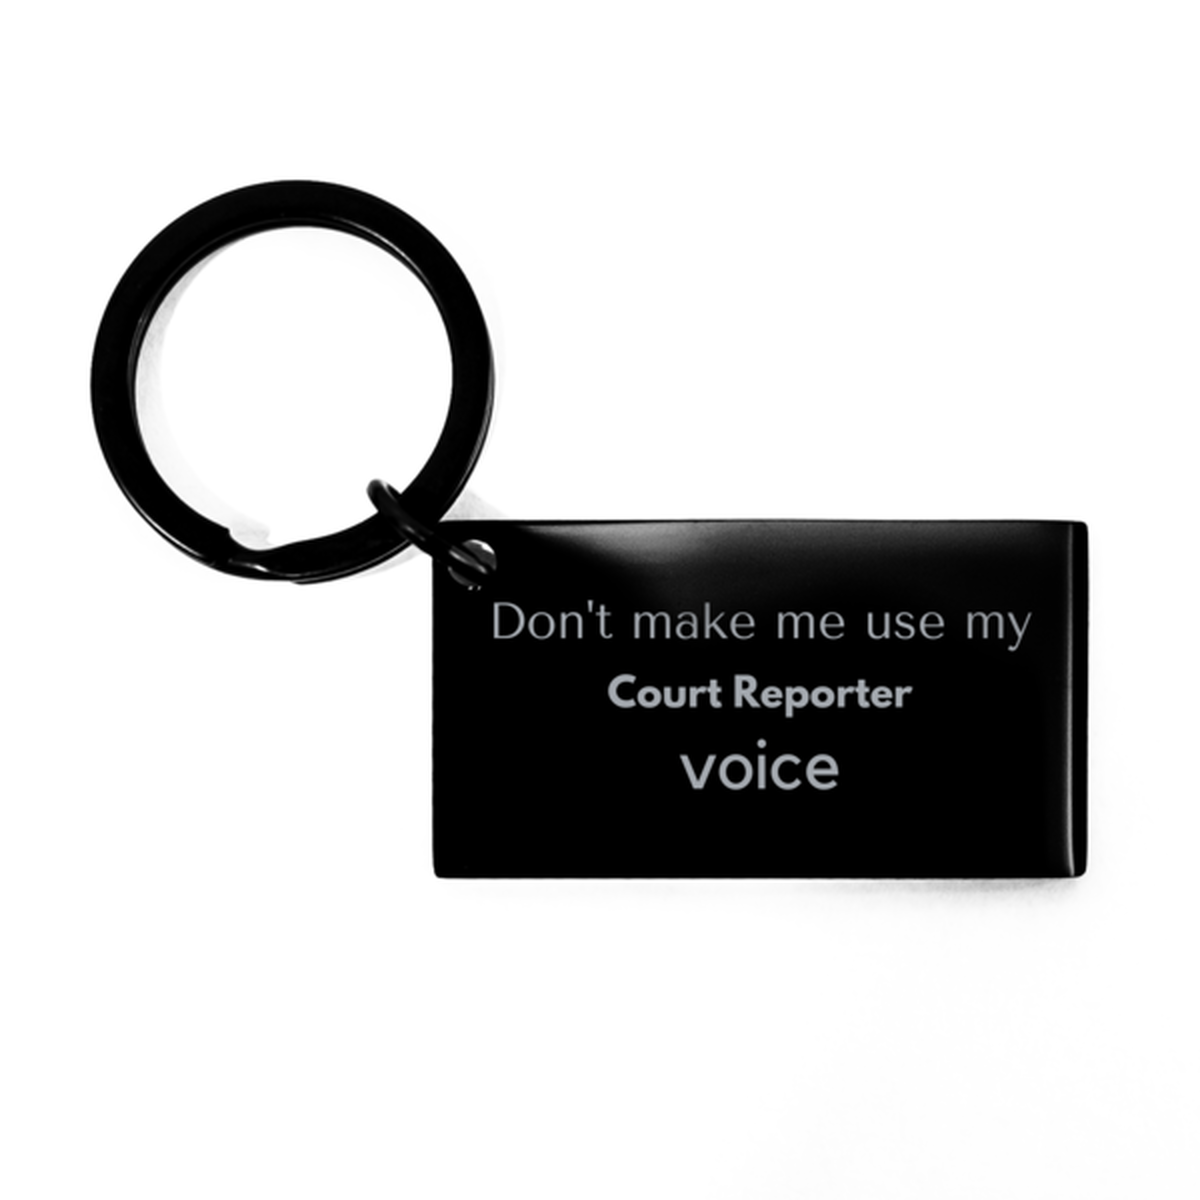 Don't make me use my Court Reporter voice, Sarcasm Court Reporter Gifts, Christmas Court Reporter Keychain Birthday Unique Gifts For Court Reporter Coworkers, Men, Women, Colleague, Friends